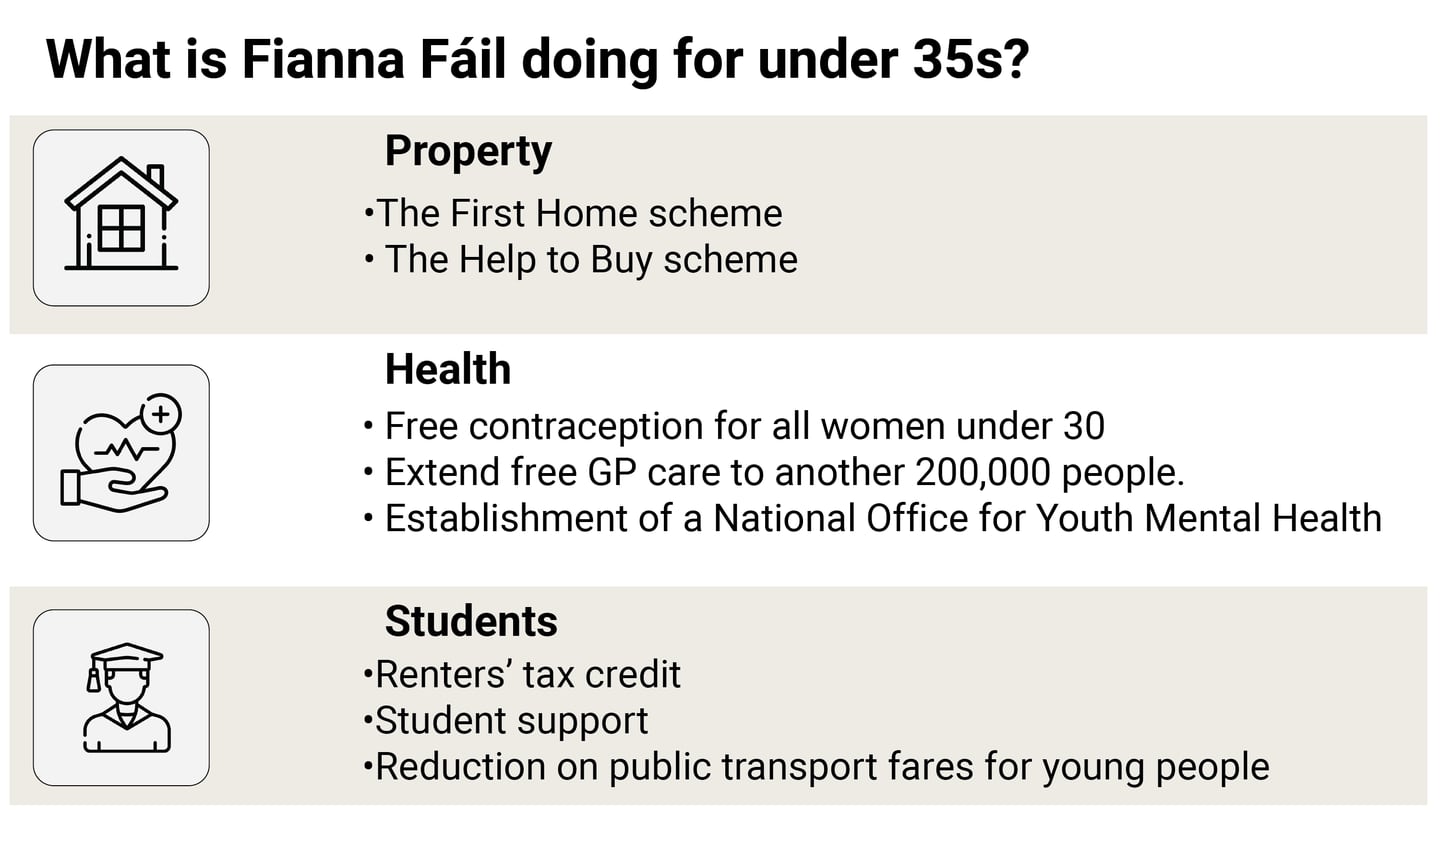 Fianna Fáil's proposals for under 35. This graph shows proposal's Fianna Fáil want to put in place for under 35 voters.